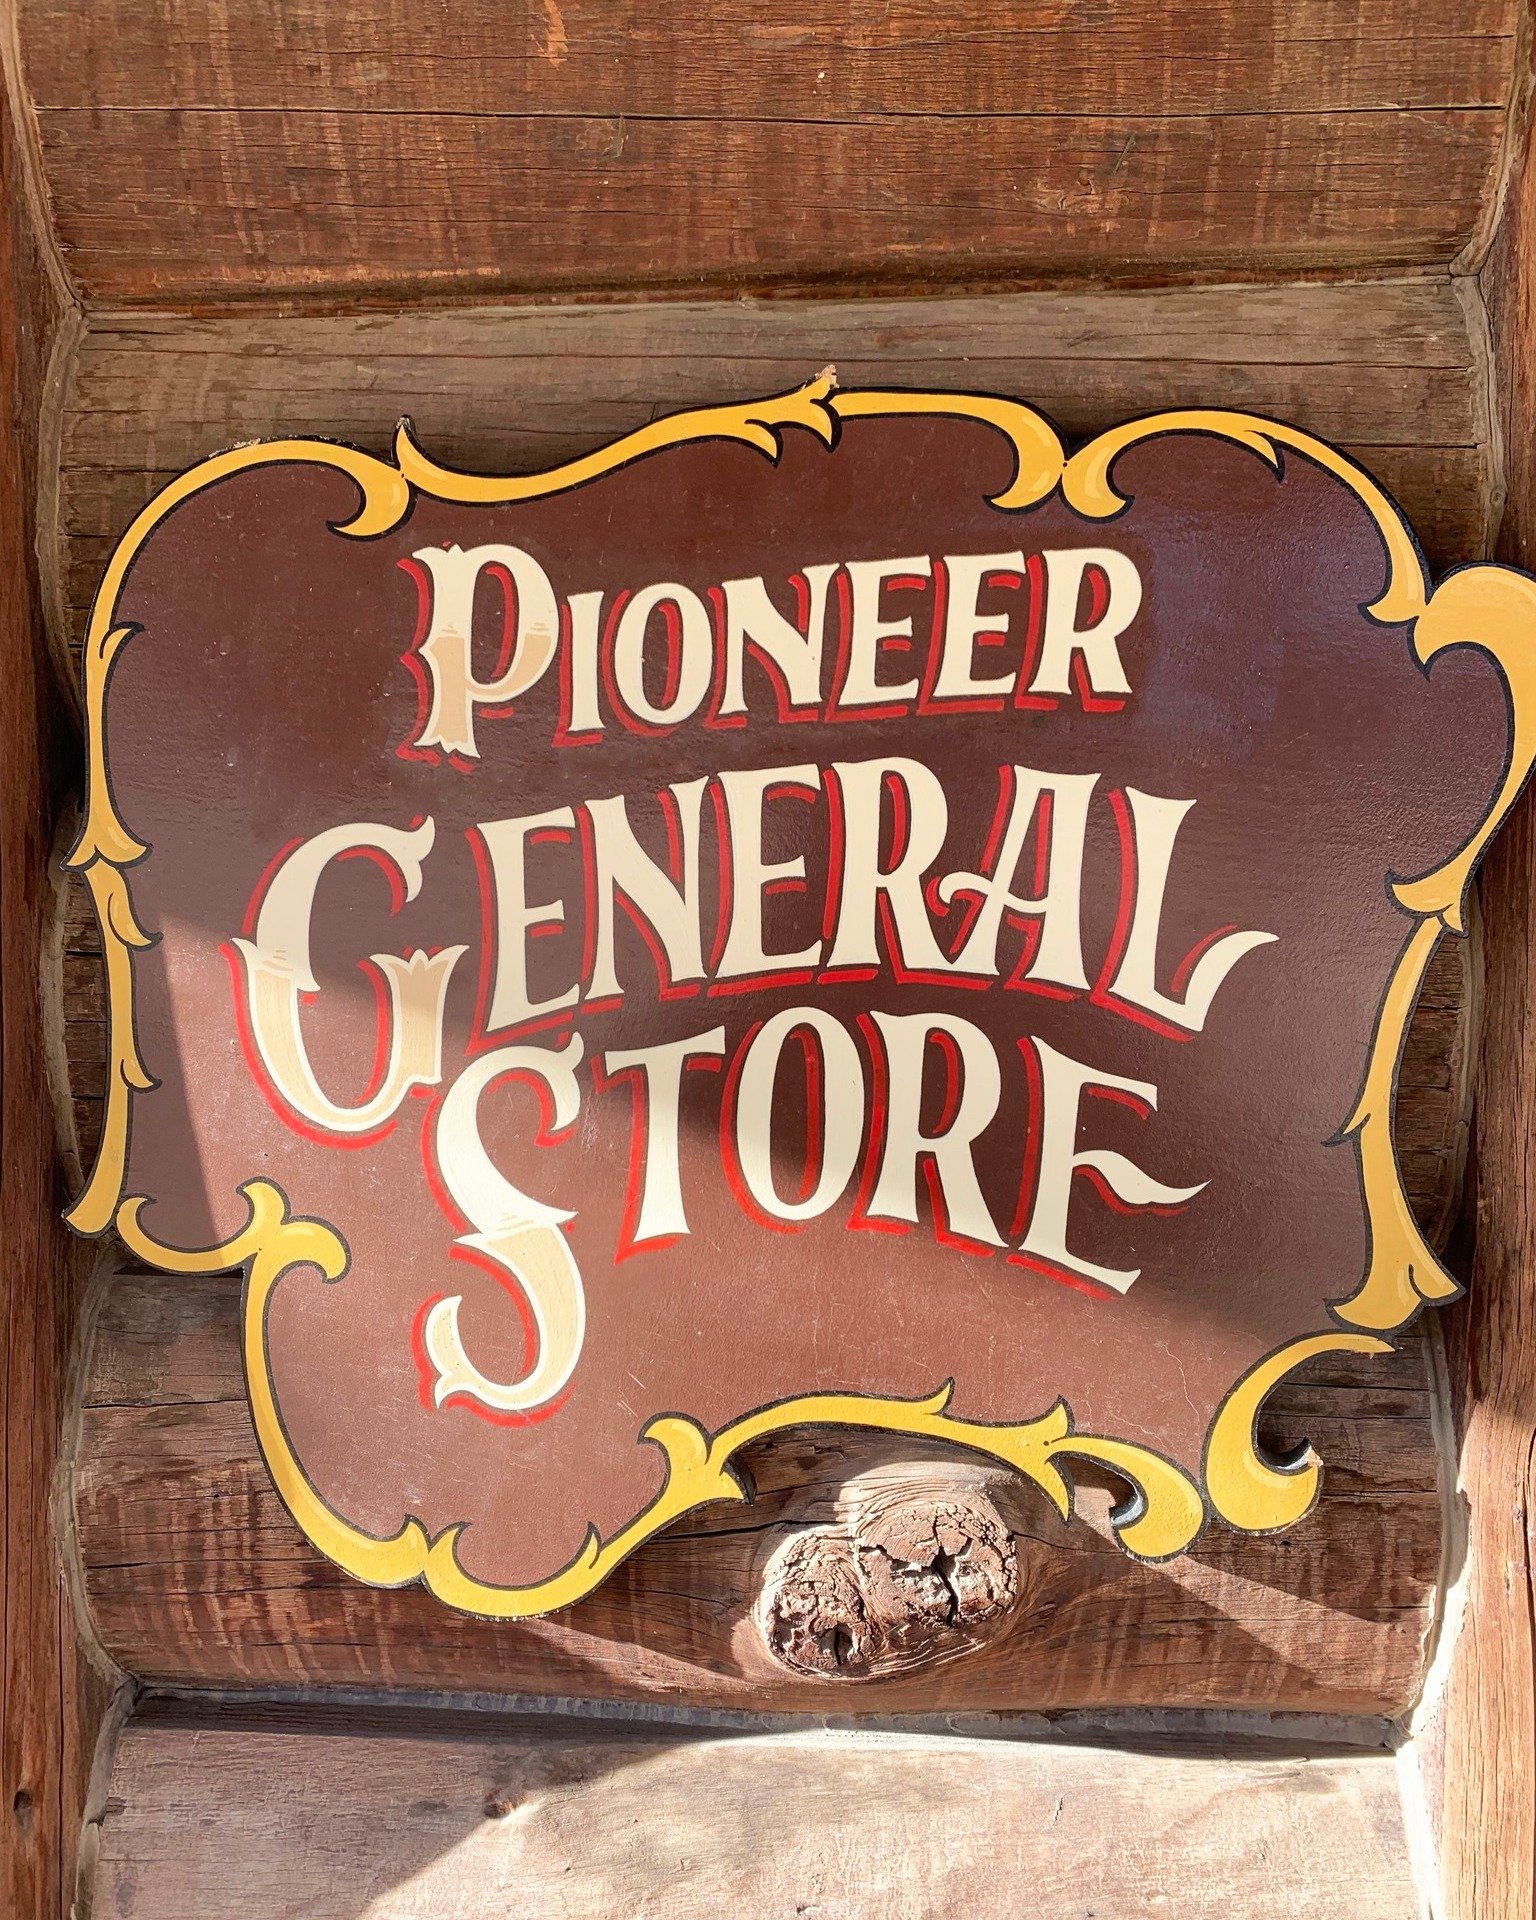 Here's what y'all can purch at the Pioneer General Store 🤠: Social Media Marketing (including posts and advertising), Email Marketing, Content Creation, SEO Strategies, Website Design &amp; Development (including amazing E-Commerce experience), Goog